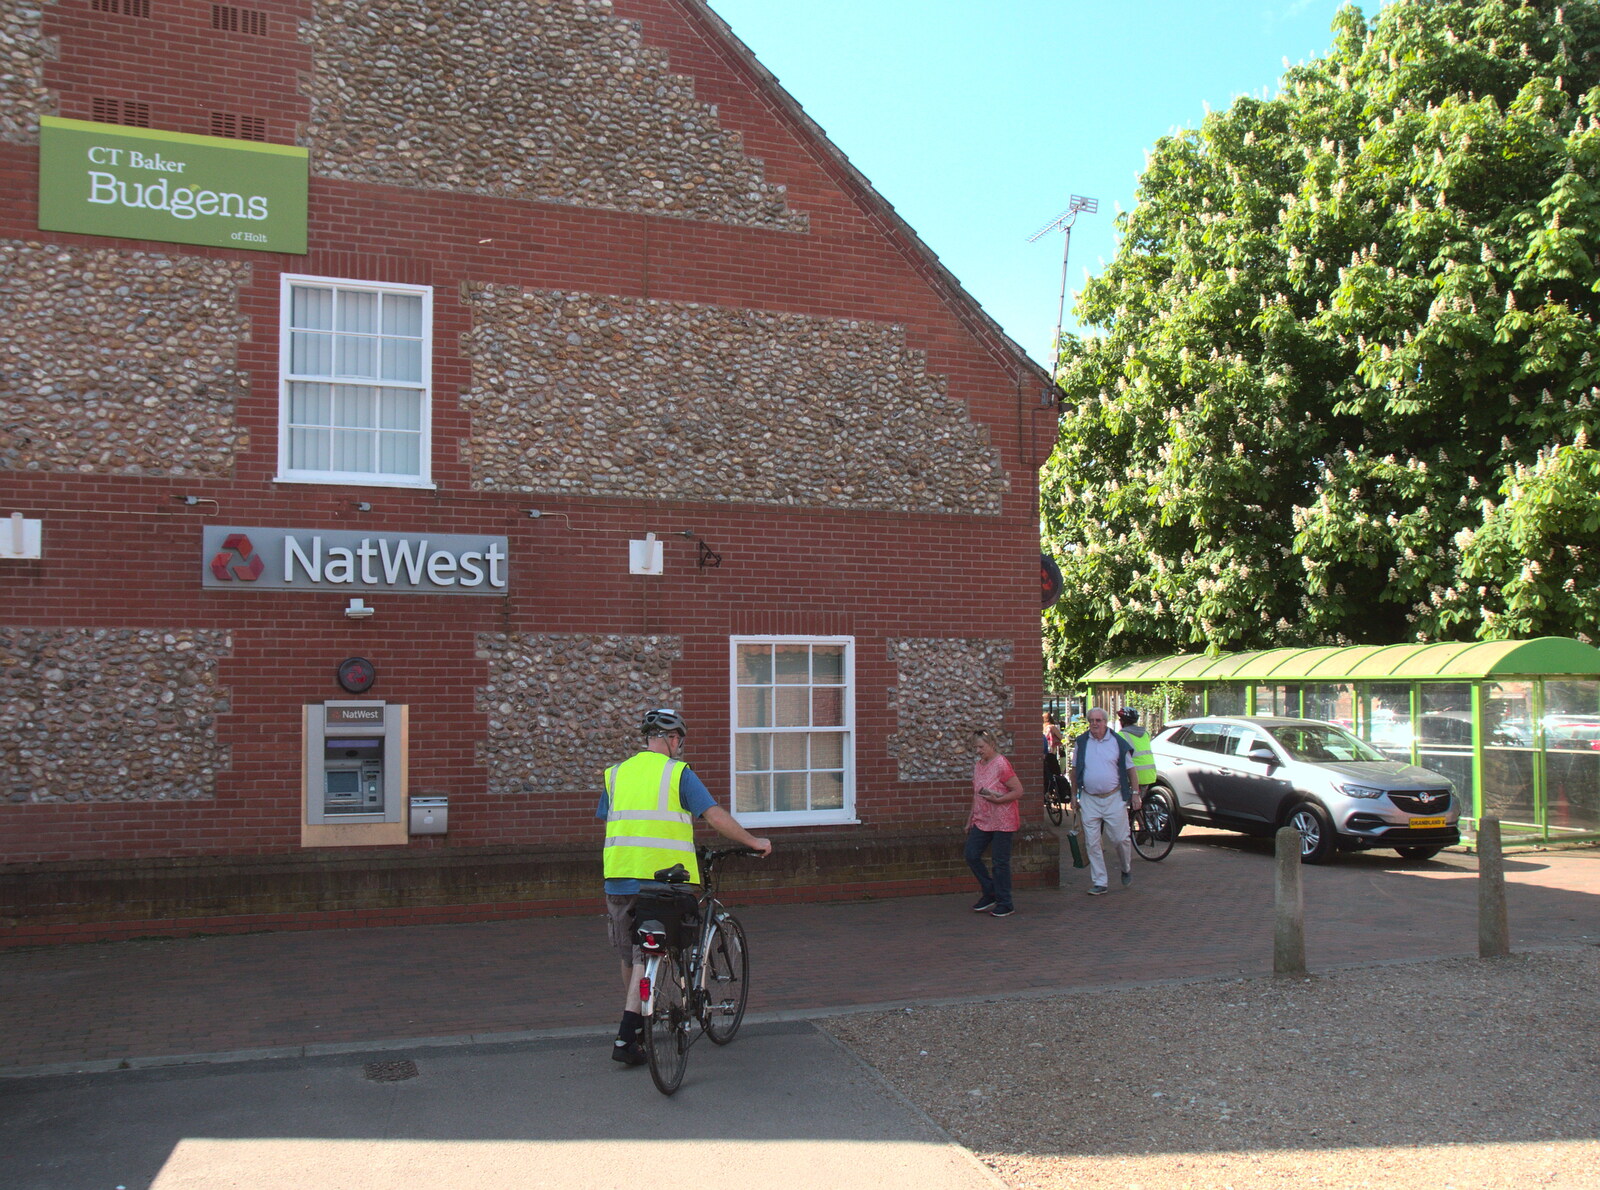 Paul pushes his bike around Budgens from The BSCC Weekend Away, Holt, Norfolk - 12th May 2018